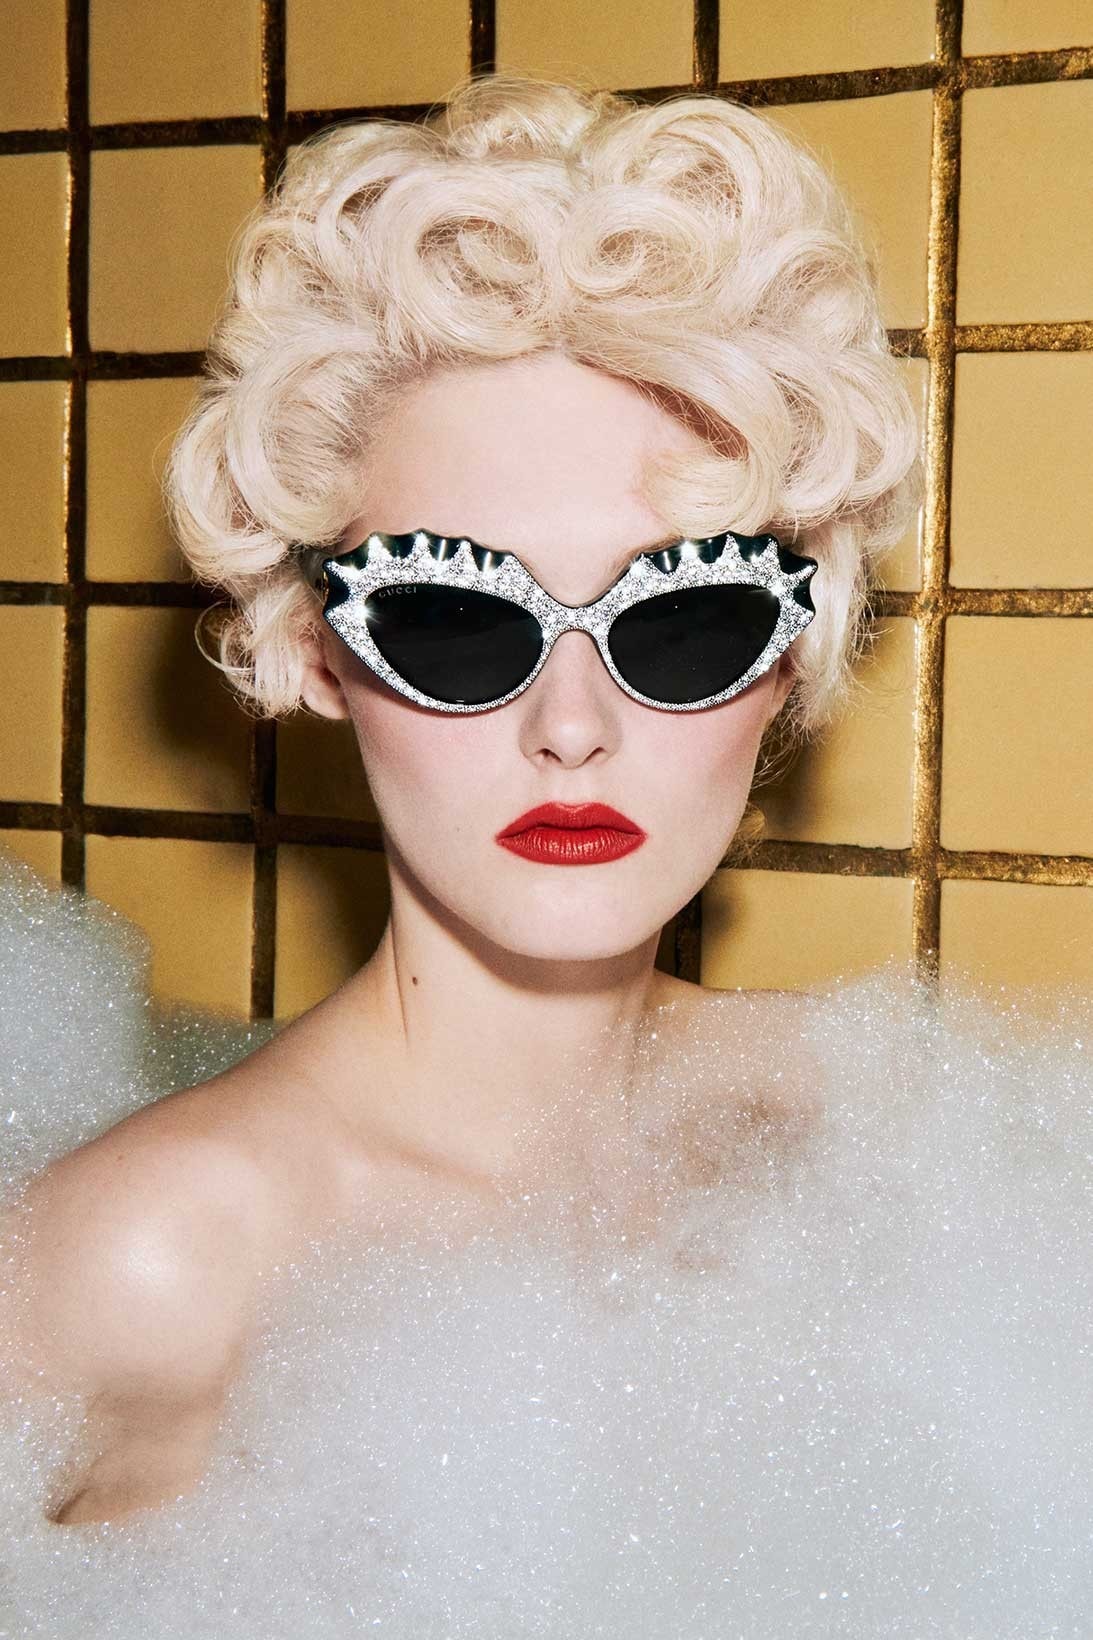 https://image-cdn.hypb.st/https%3A%2F%2Fhypebeast.com%2Fimage%2F2021%2F05%2Fgucci-hollywood-forever-sunglasses-series-pave-crystals-violet-lens-unisex-vintage-glam-5.jpeg?cbr=1&q=90